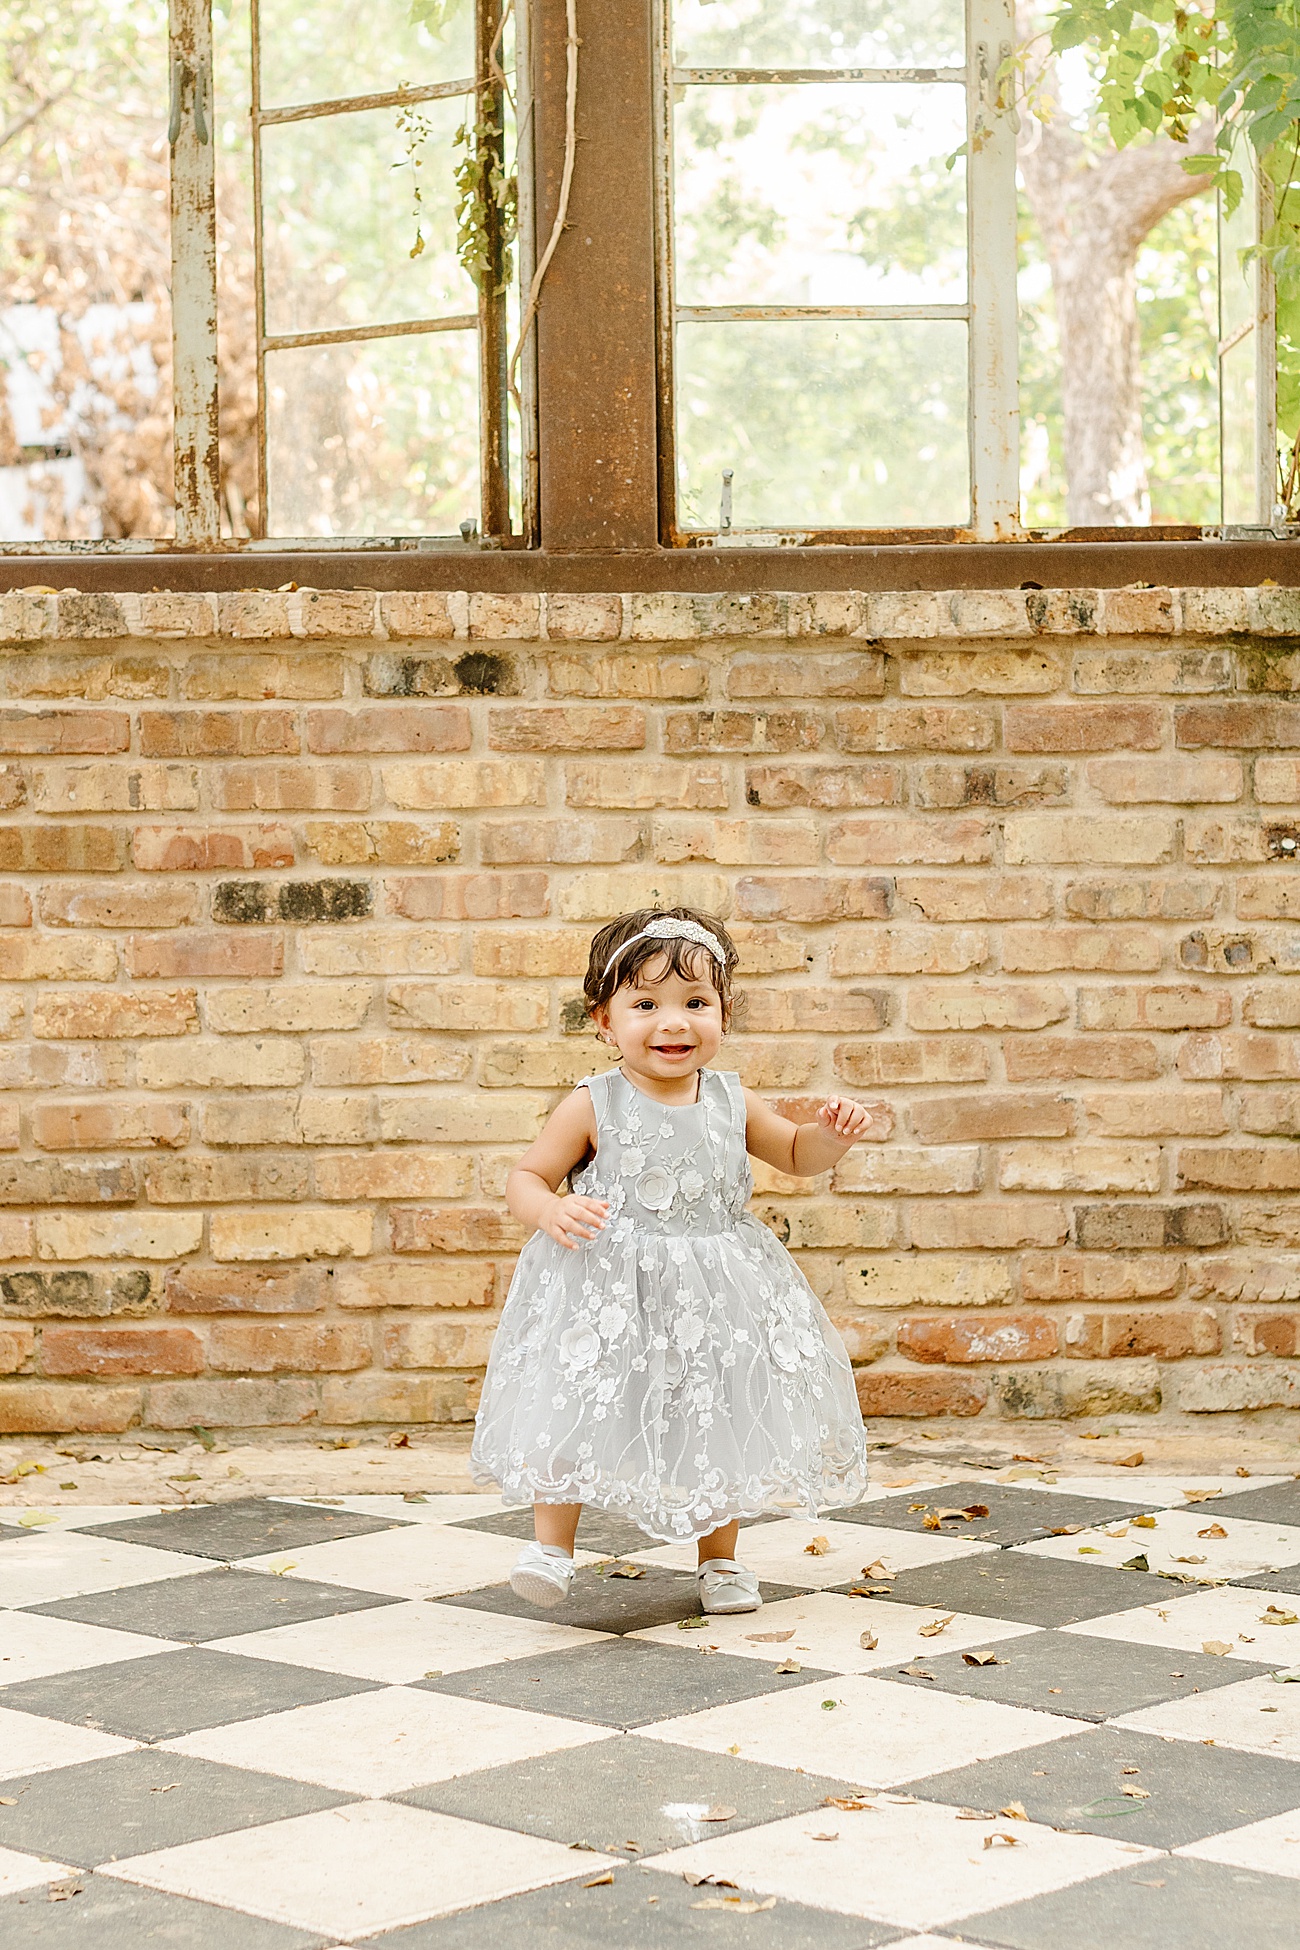 Little girl smiling inside vintage greenhouse in Austin, TX. Photo by Sana Ahmed Photography